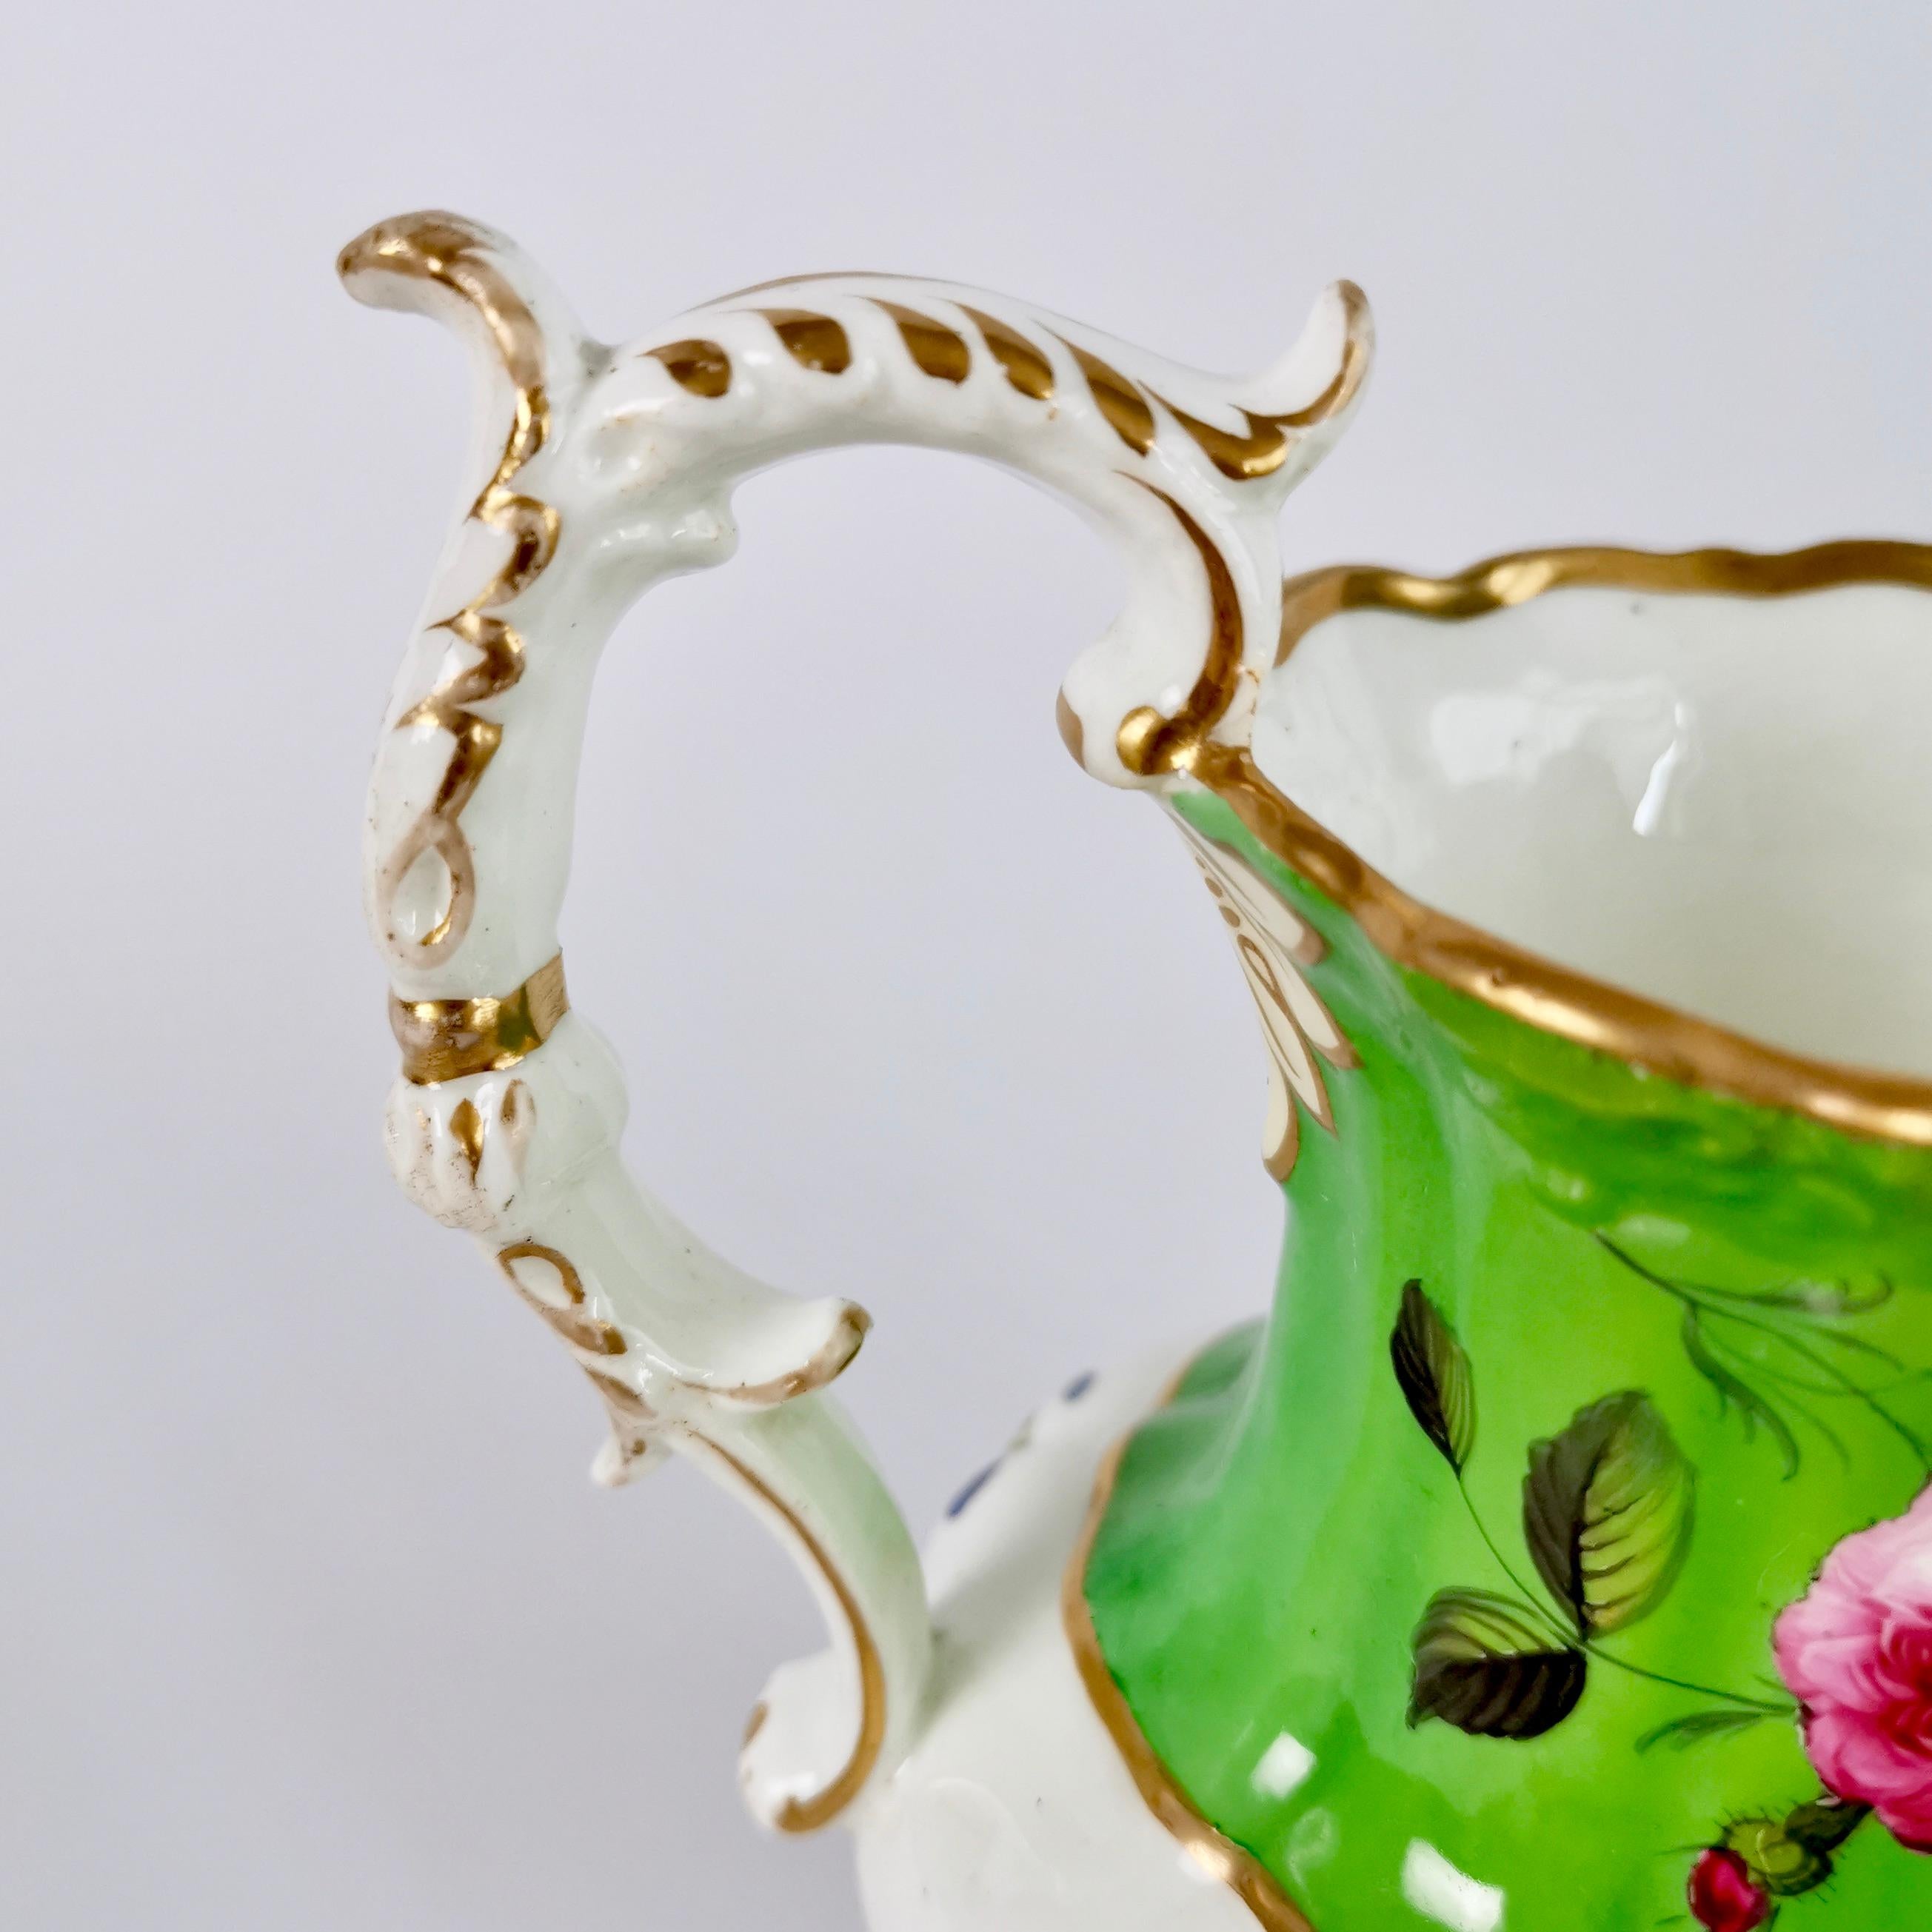 Hilditch Porcelain Pitcher, Apple Green with Hand Painted Flowers, circa 1830 1